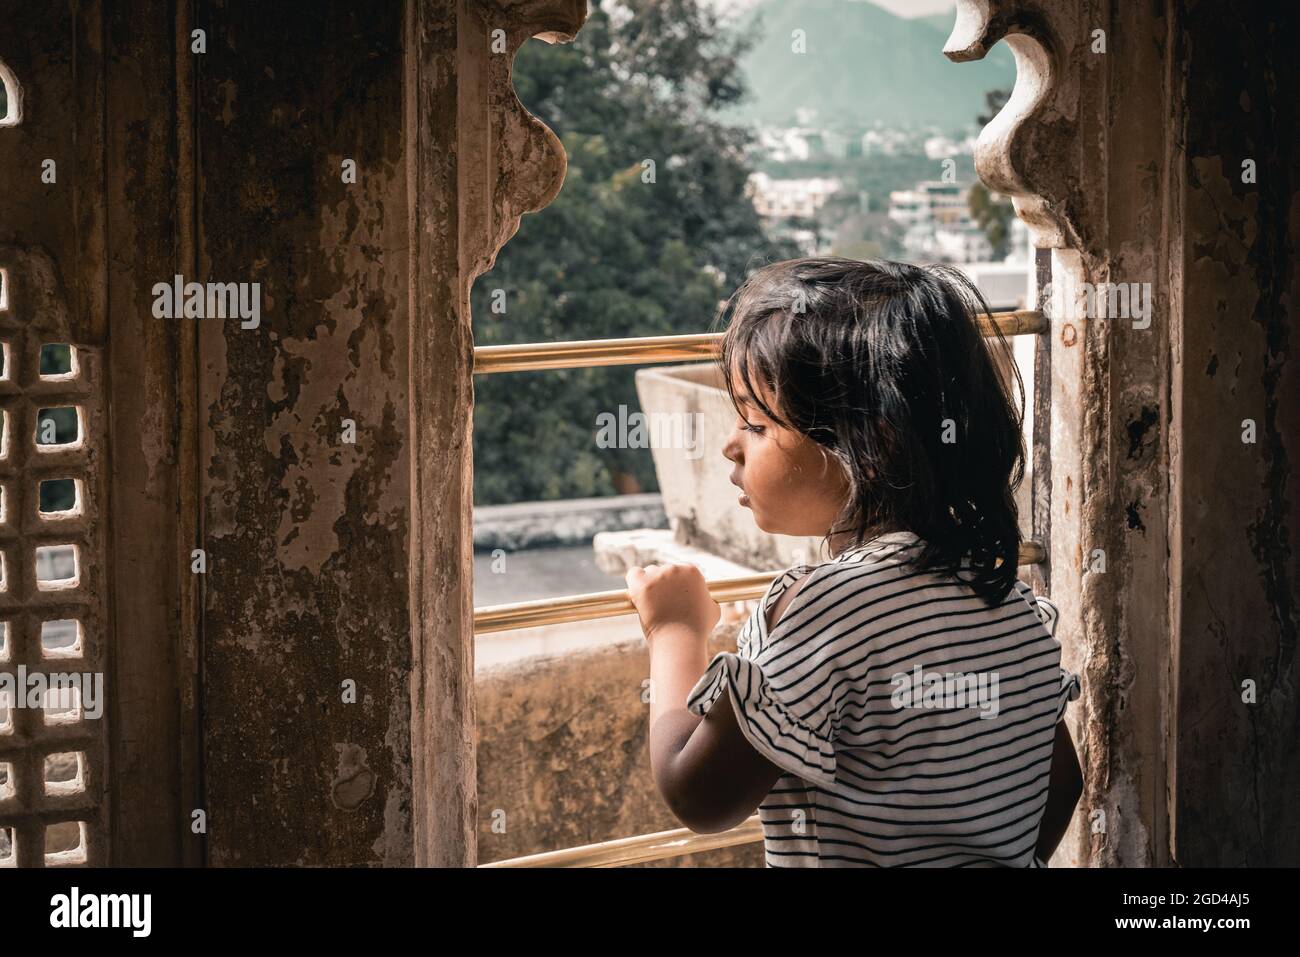 Colored portrait of a young girl child curiously looking out from a window of vintage architectural tourist building Stock Photo